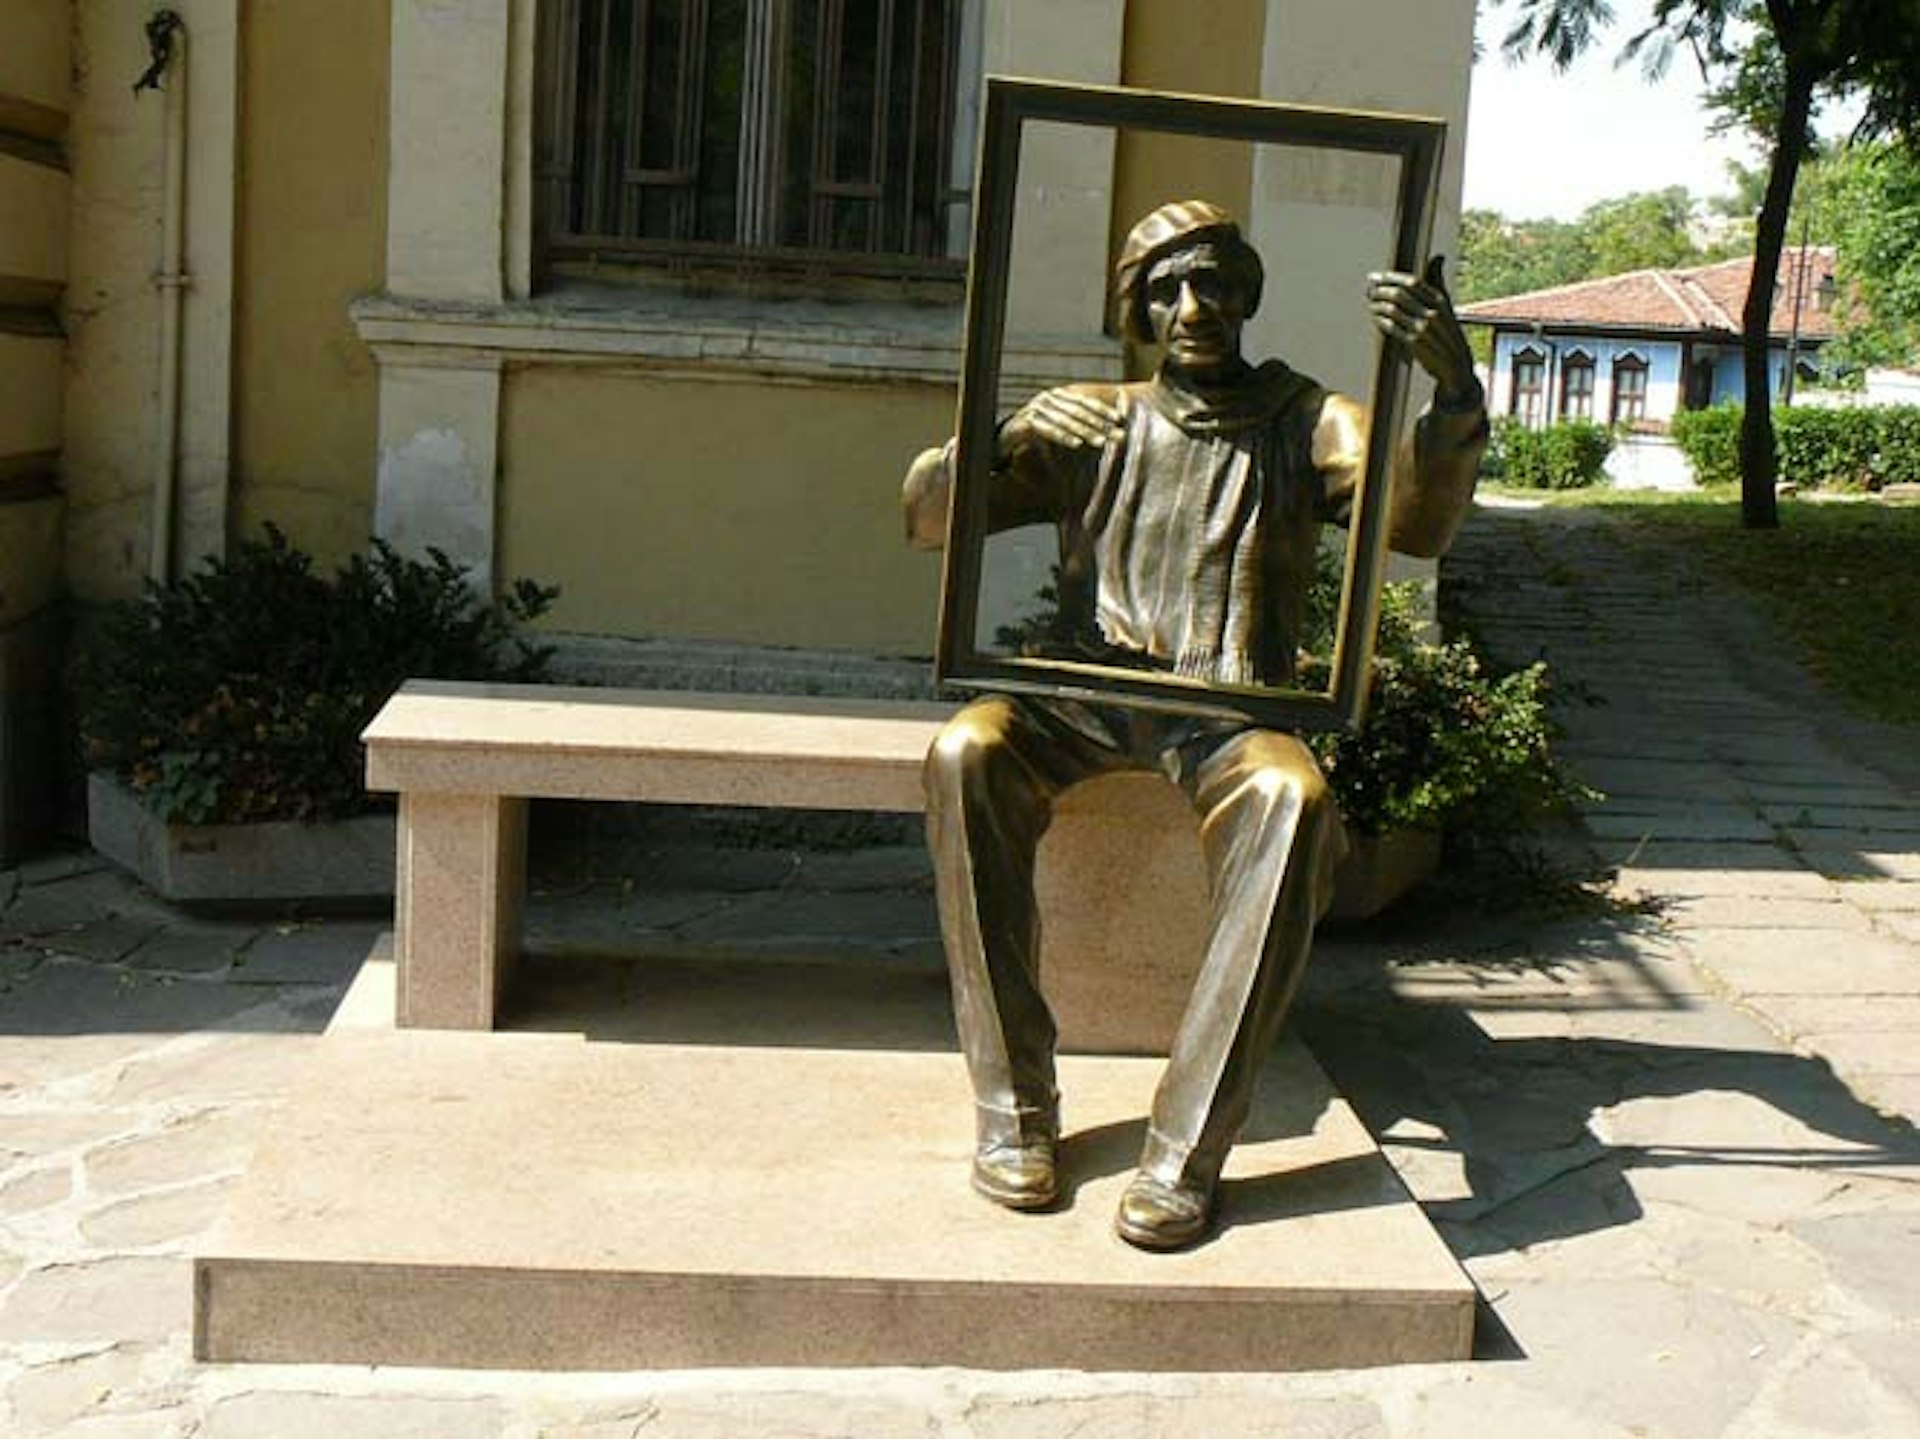 A cheeky artist statue in Plovdiv's Old Town. Image by Anita Isalska / Lonely Planet